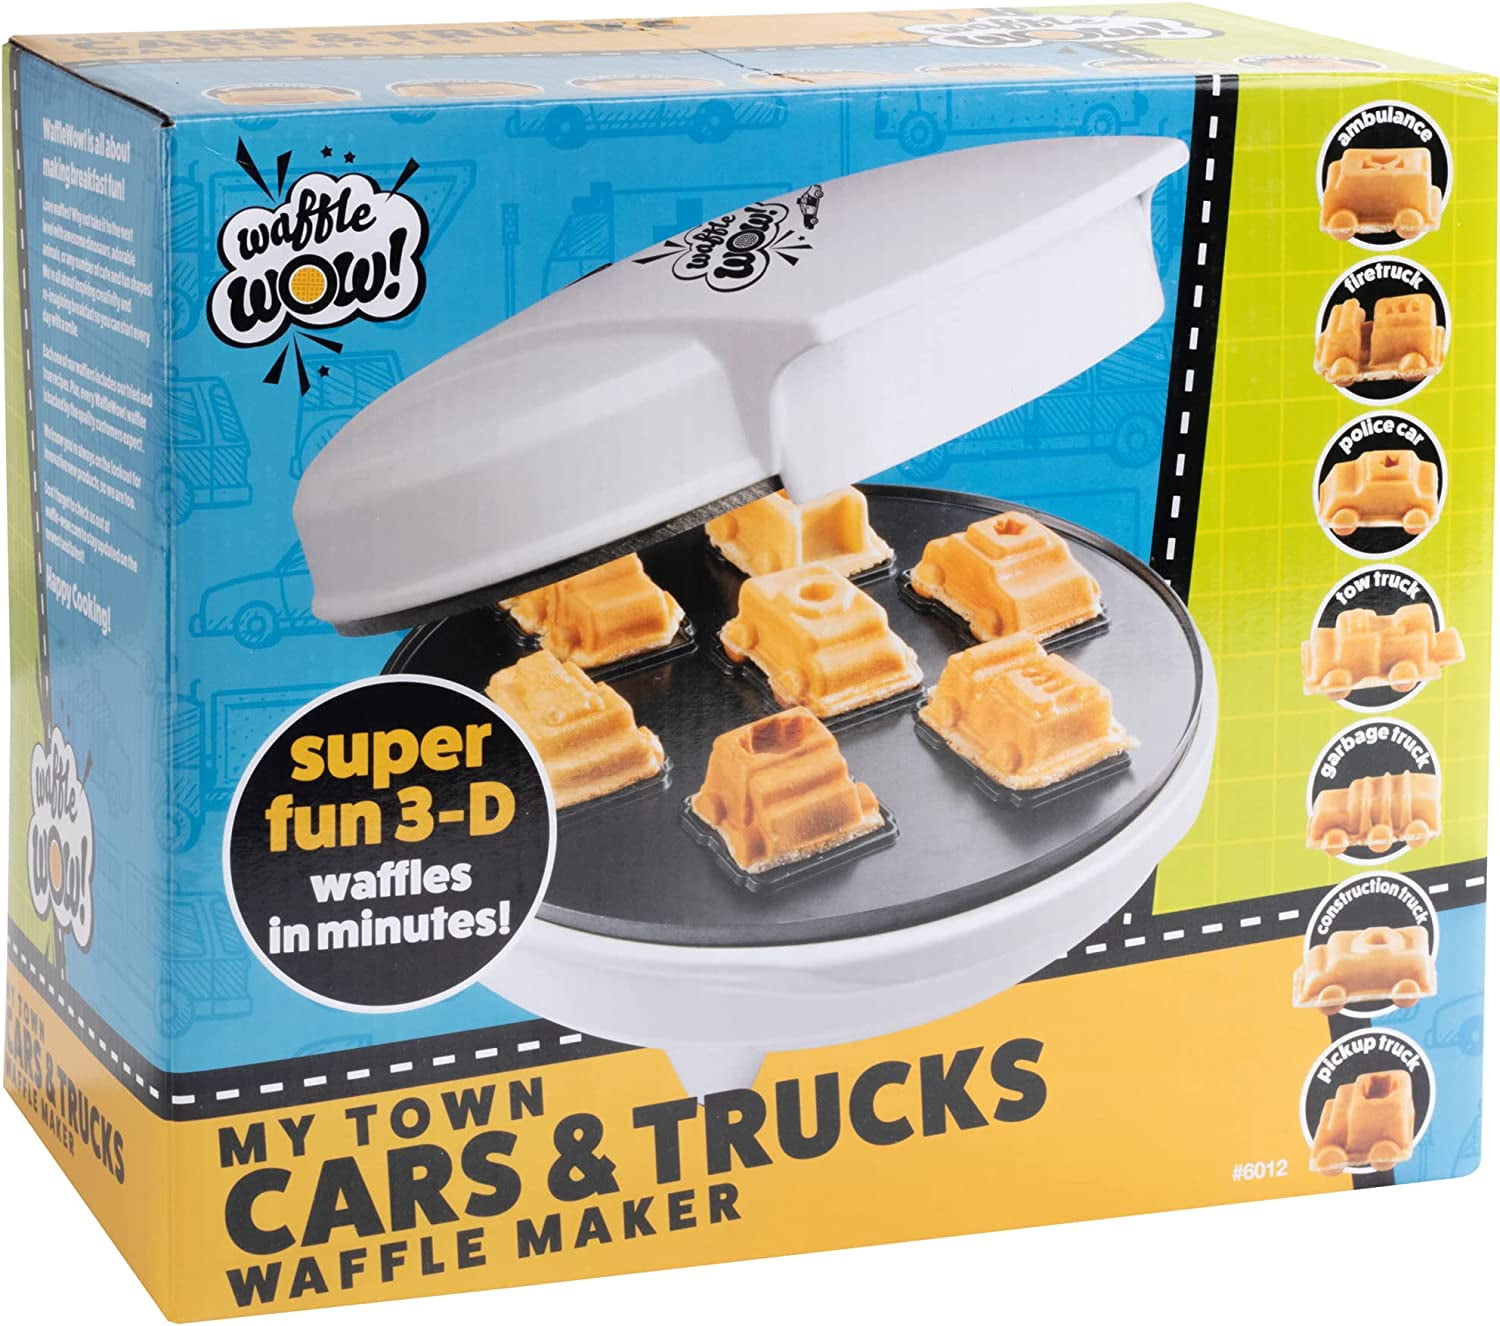 Waffle wow cars and trucks waffle maker - Does it work￼!! ￼ 